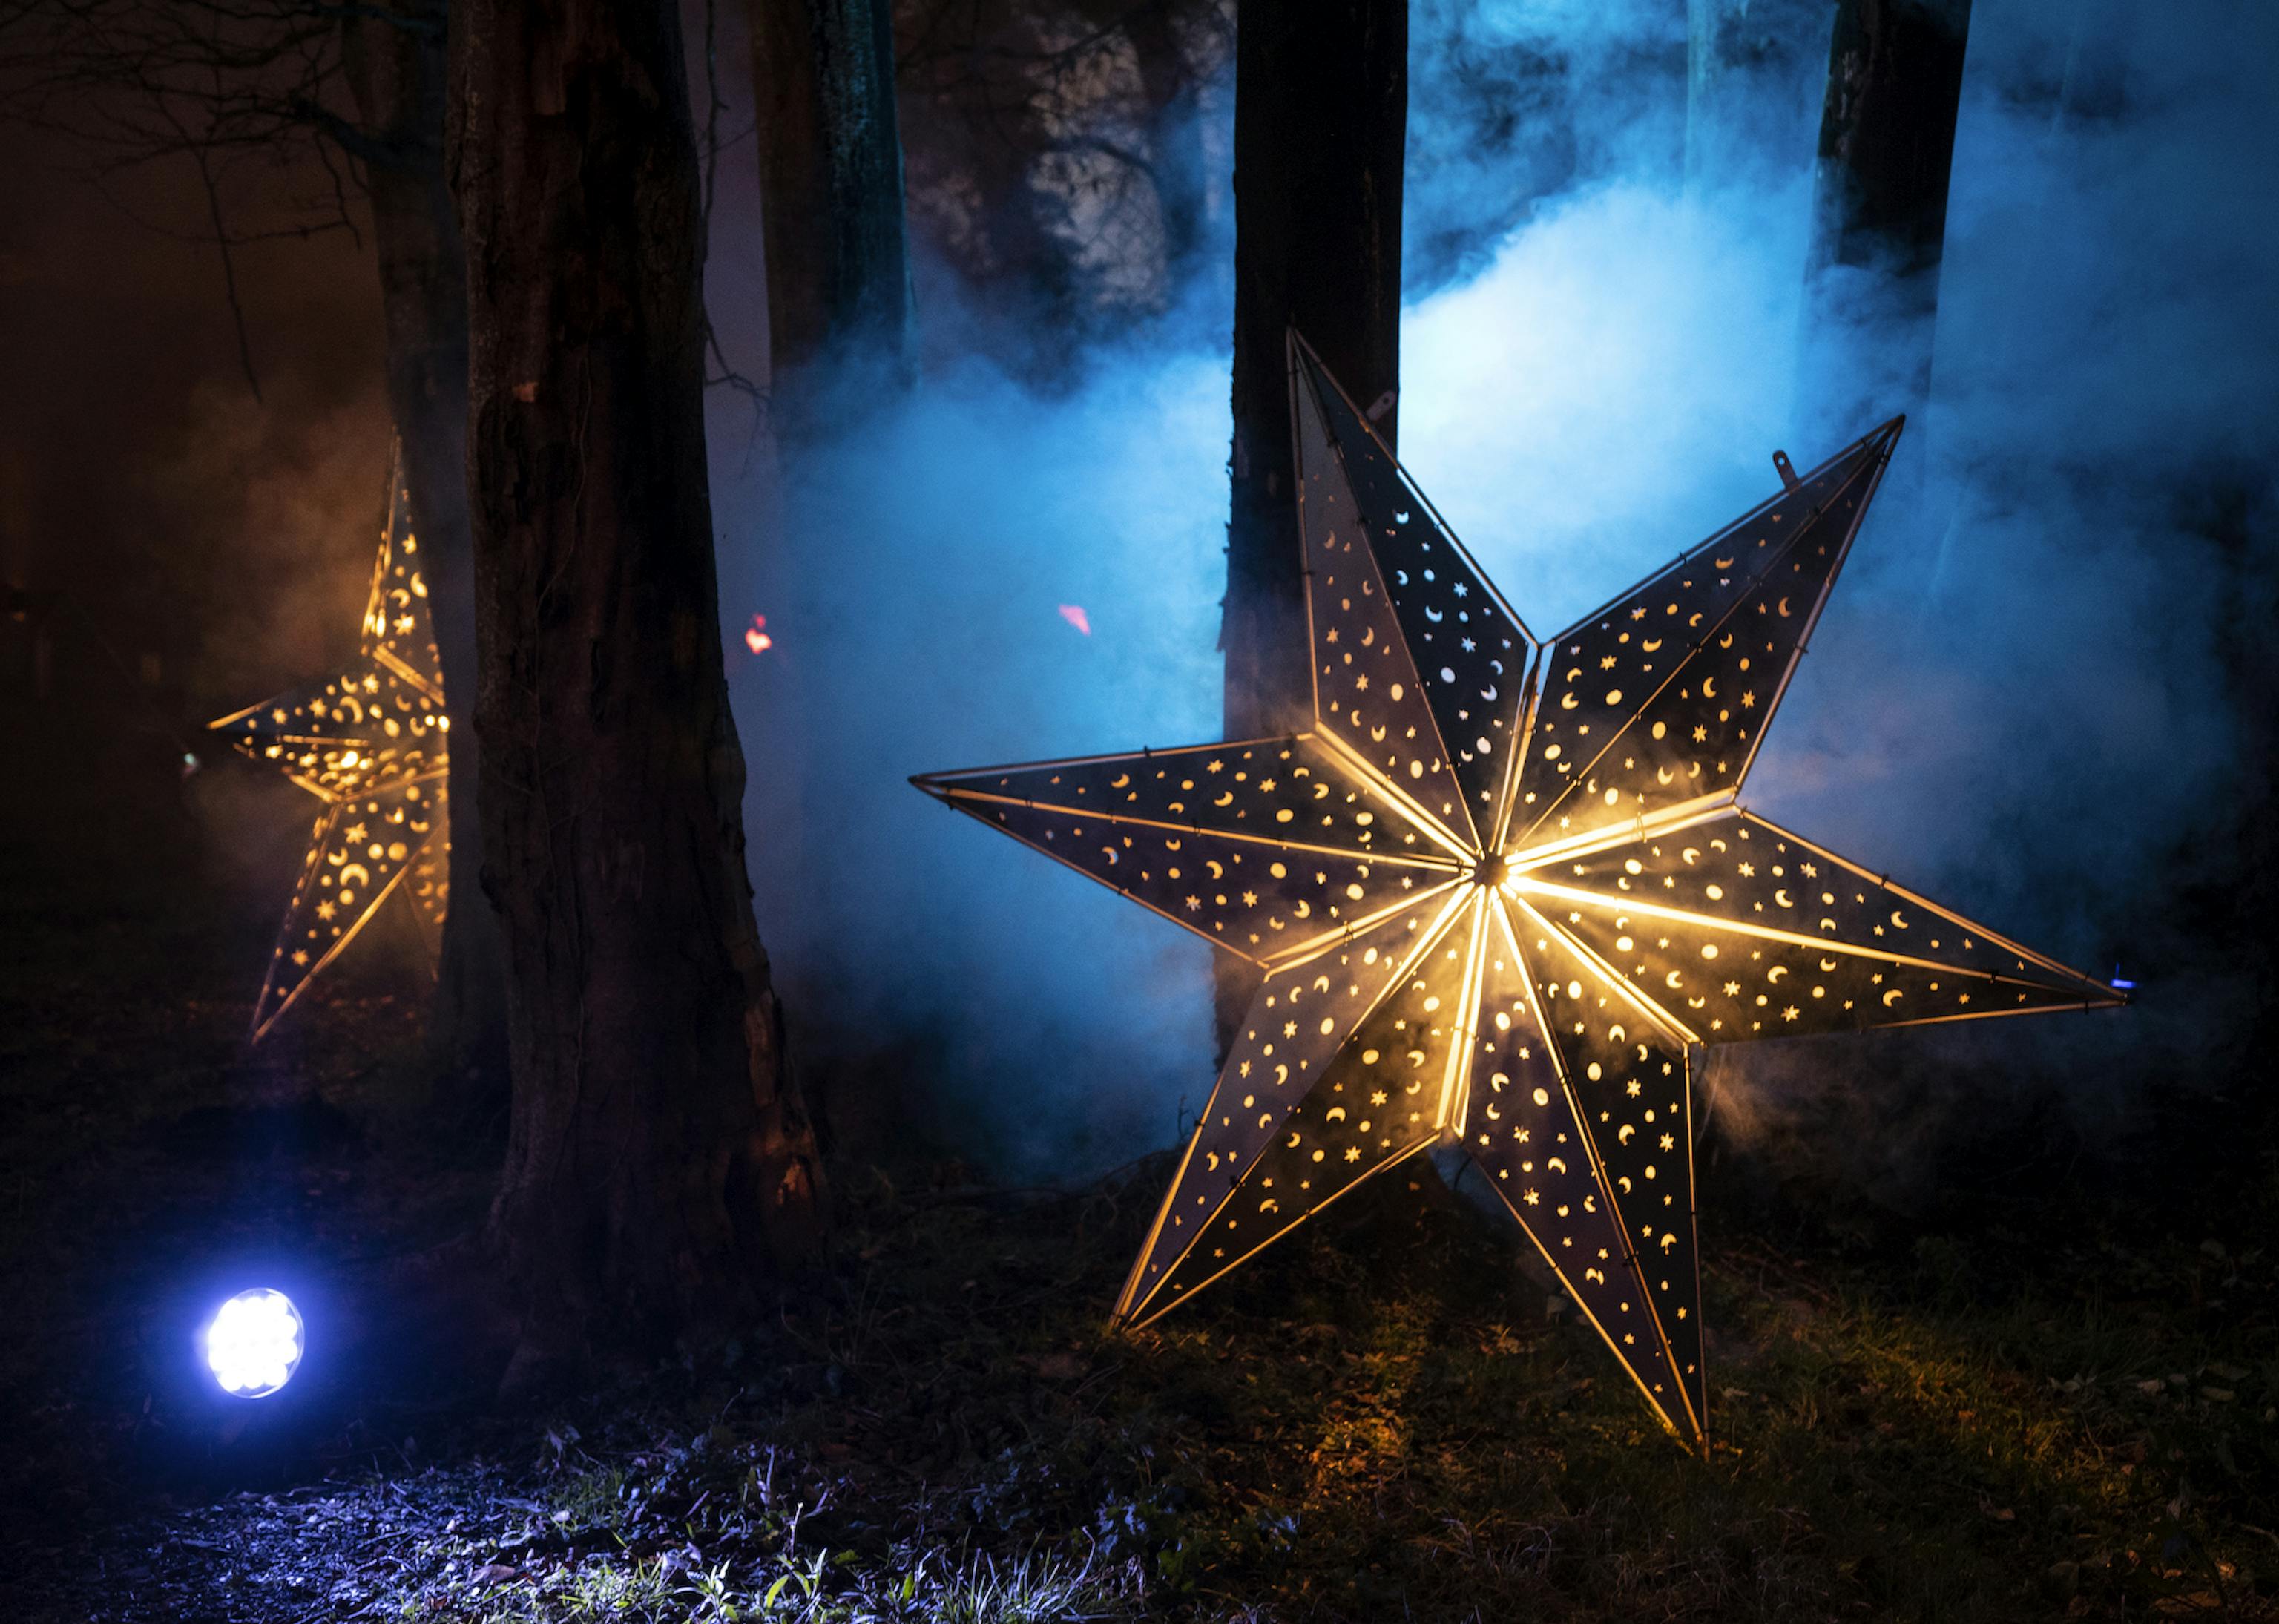 Two stars structures that light up from within in a woodland area, lit up by blue lighting and smoke